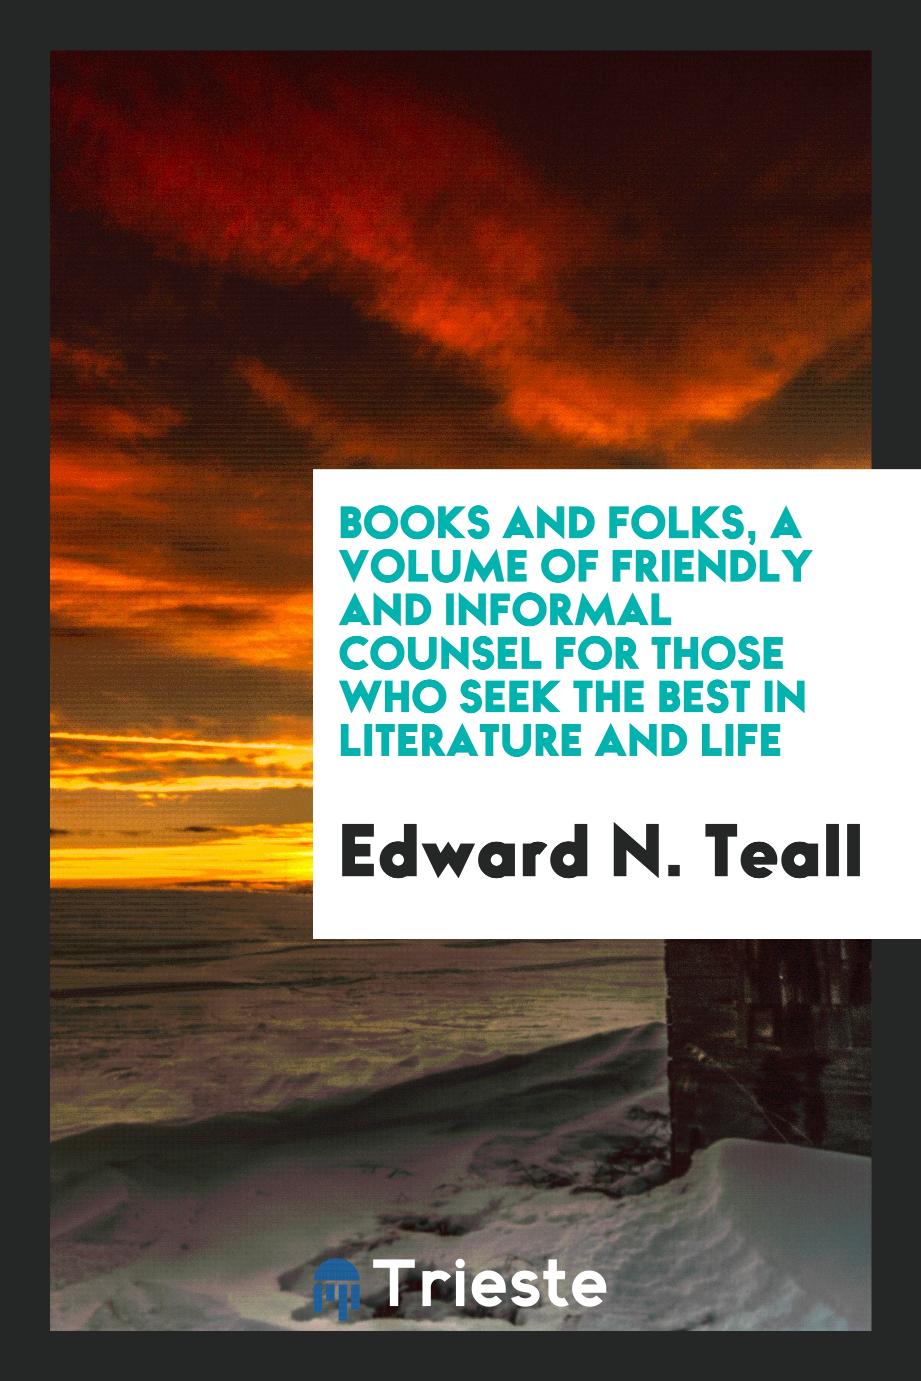 Books and folks, a volume of friendly and informal counsel for those who seek the best in literature and life